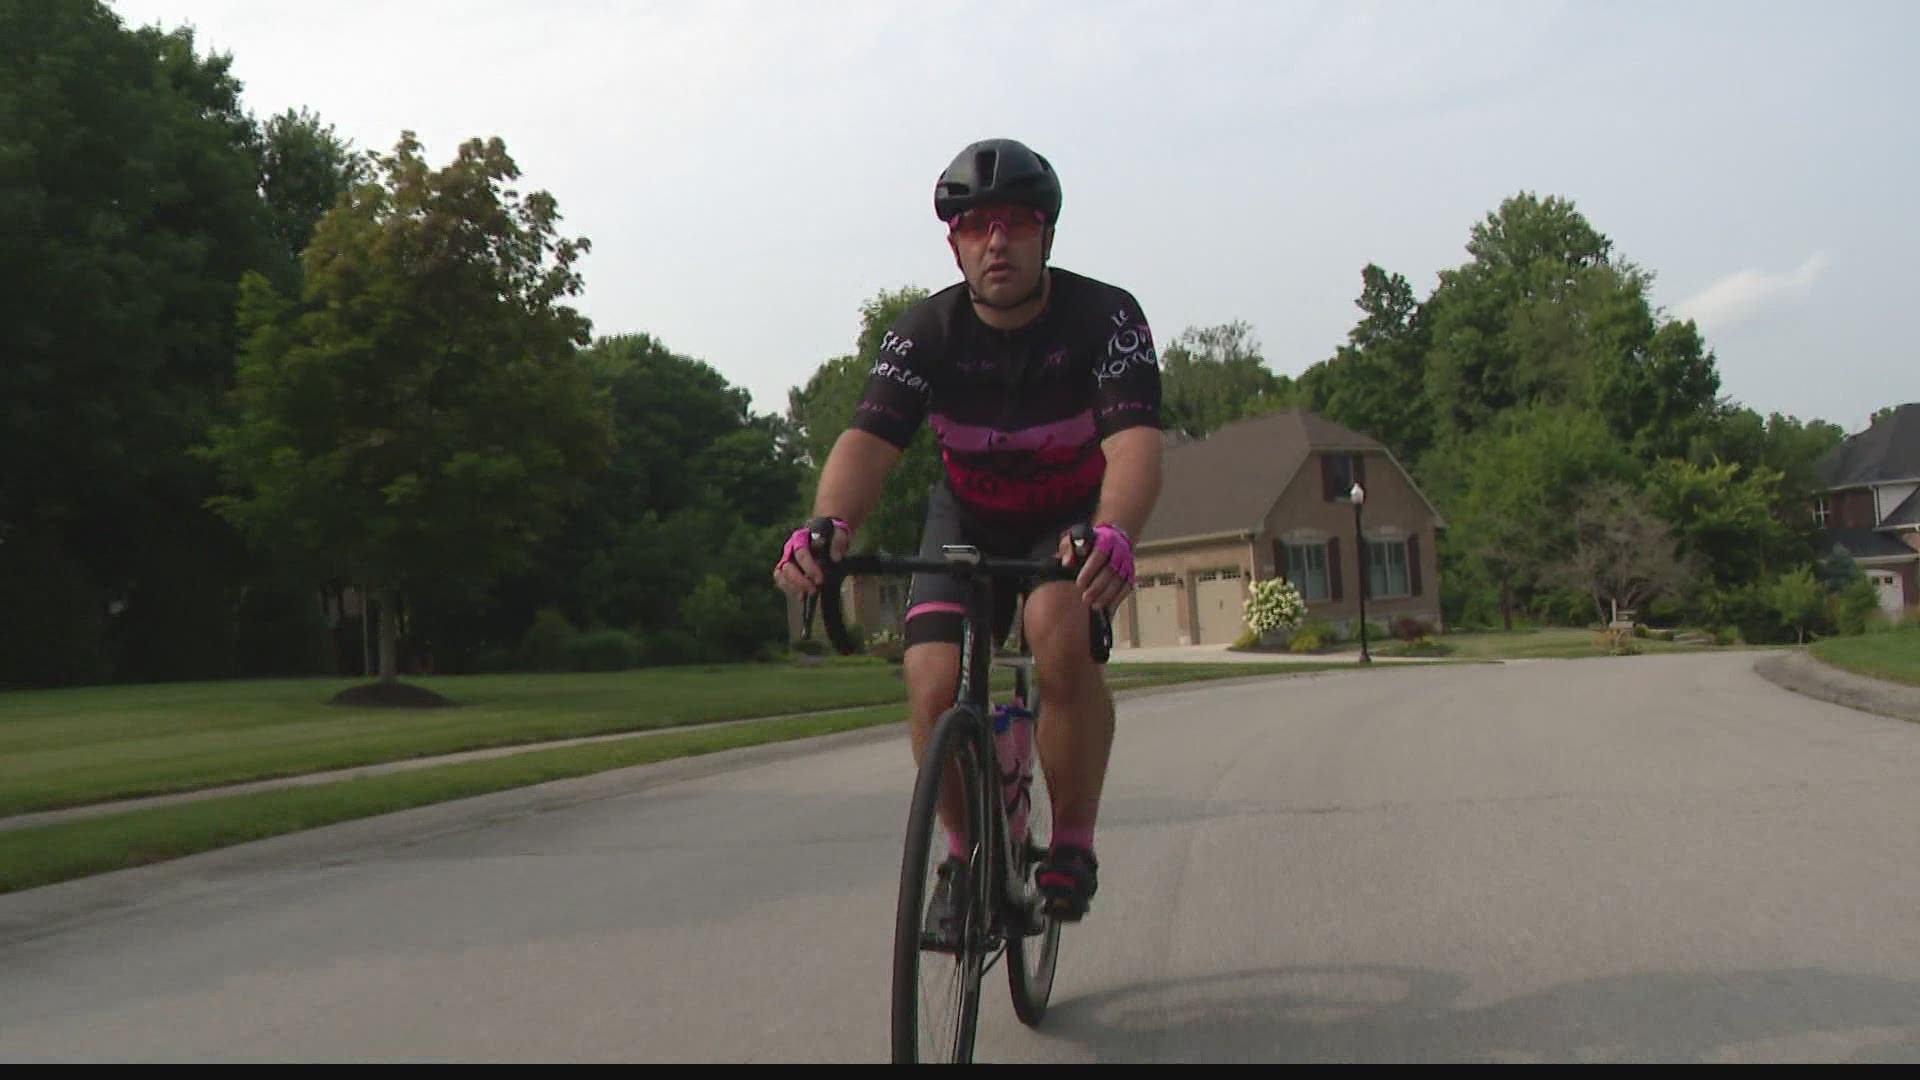 Founder Kyle Vannoni hopes to have 100 cyclists in this year's ride.